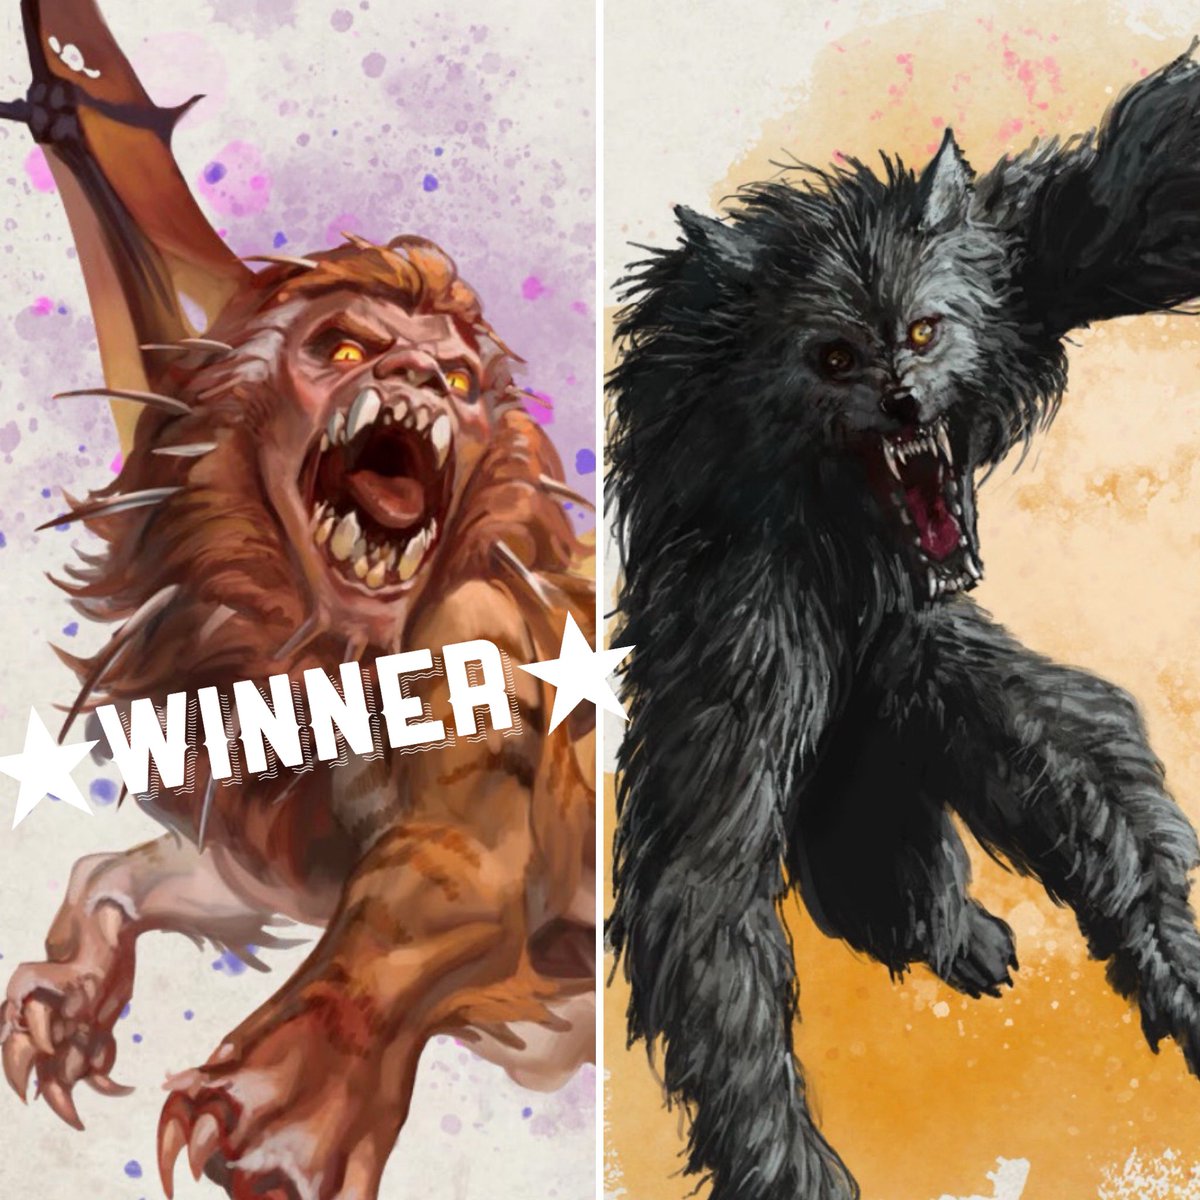 Winners from round one on X. Round 2 starts tomorrow! Who’s going all the way? (And check out winners on our IG too!) #MarchMonsterMadness #DnD